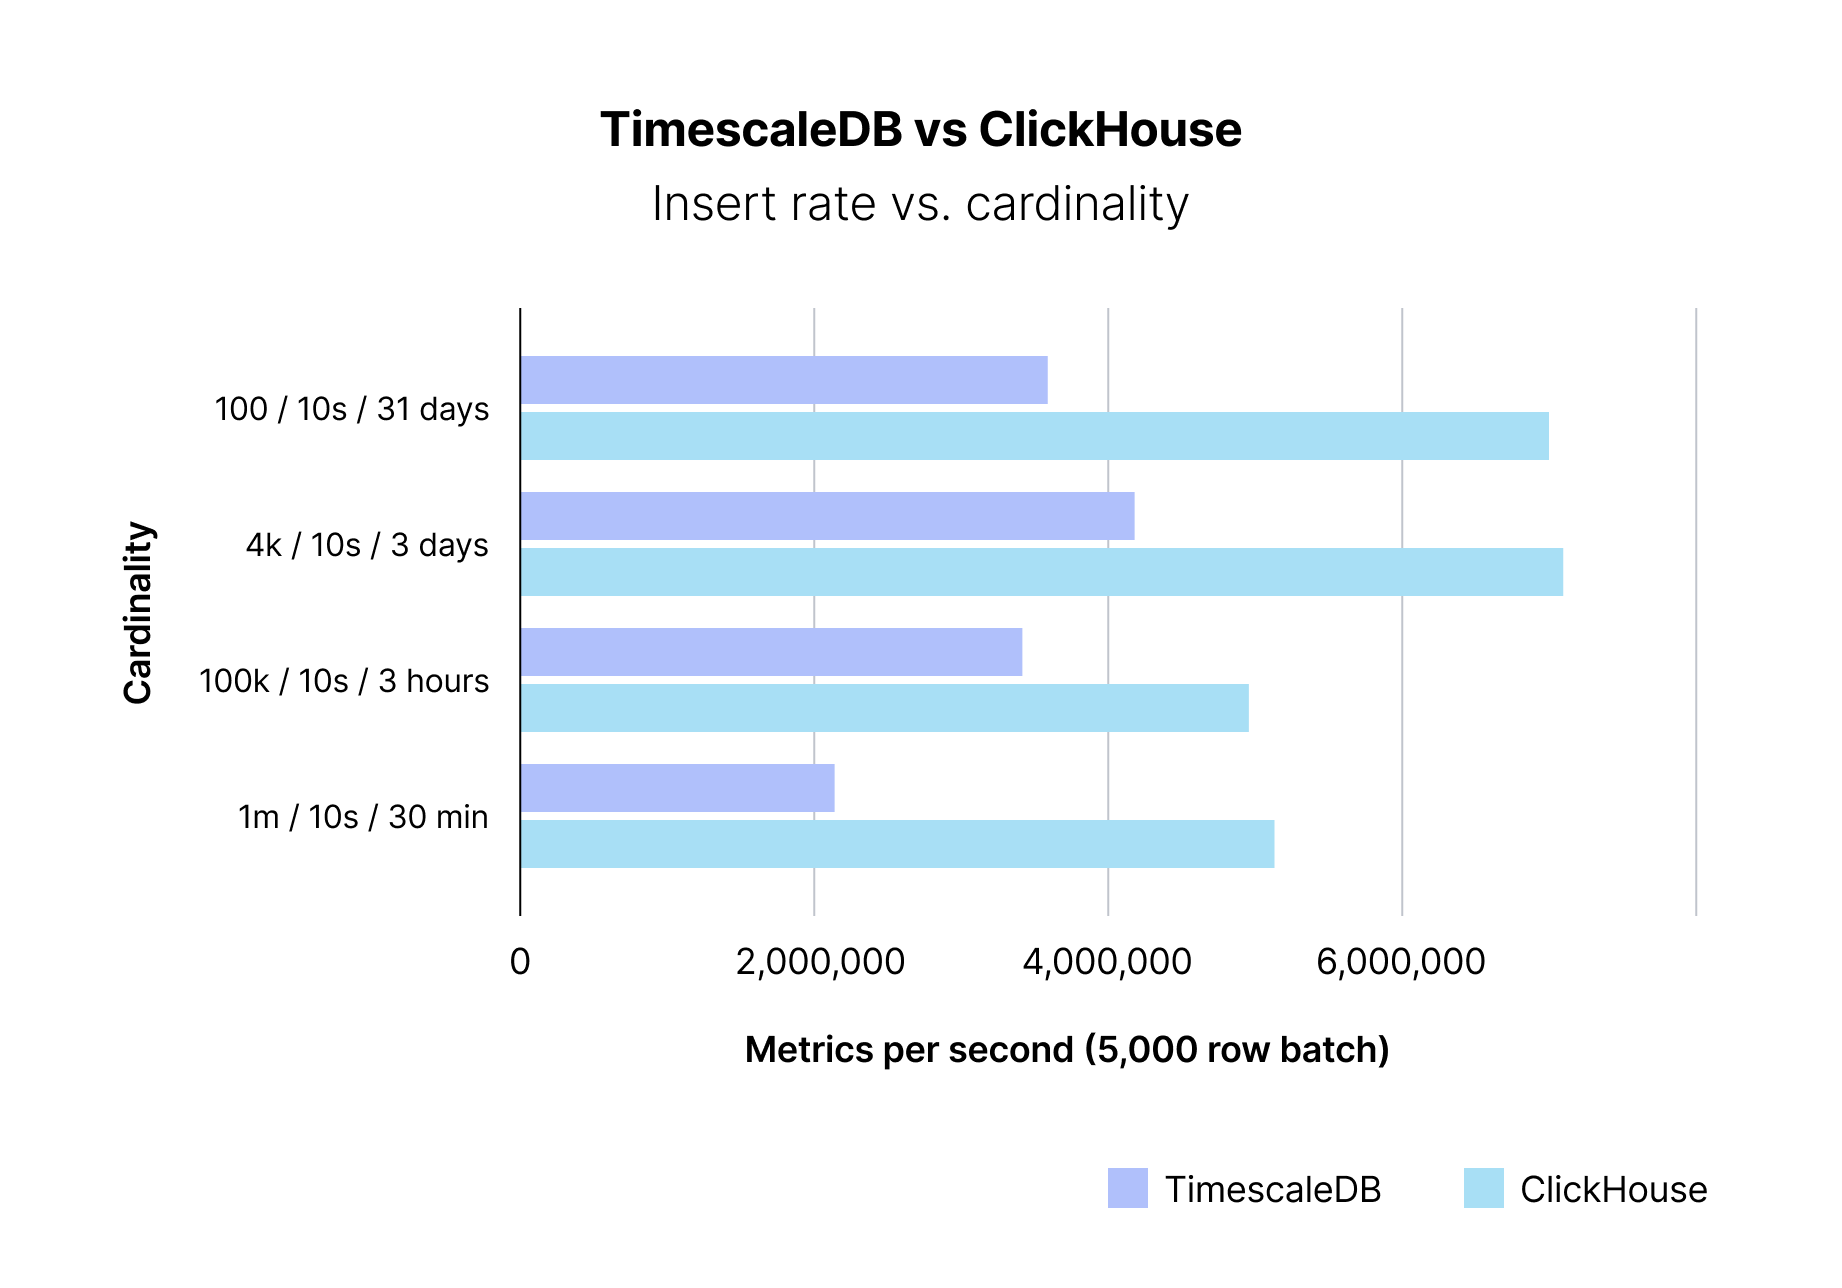 Insert comparison between ClickHouse and TimescaleDB at cardinalities between 100 and 1 million hosts